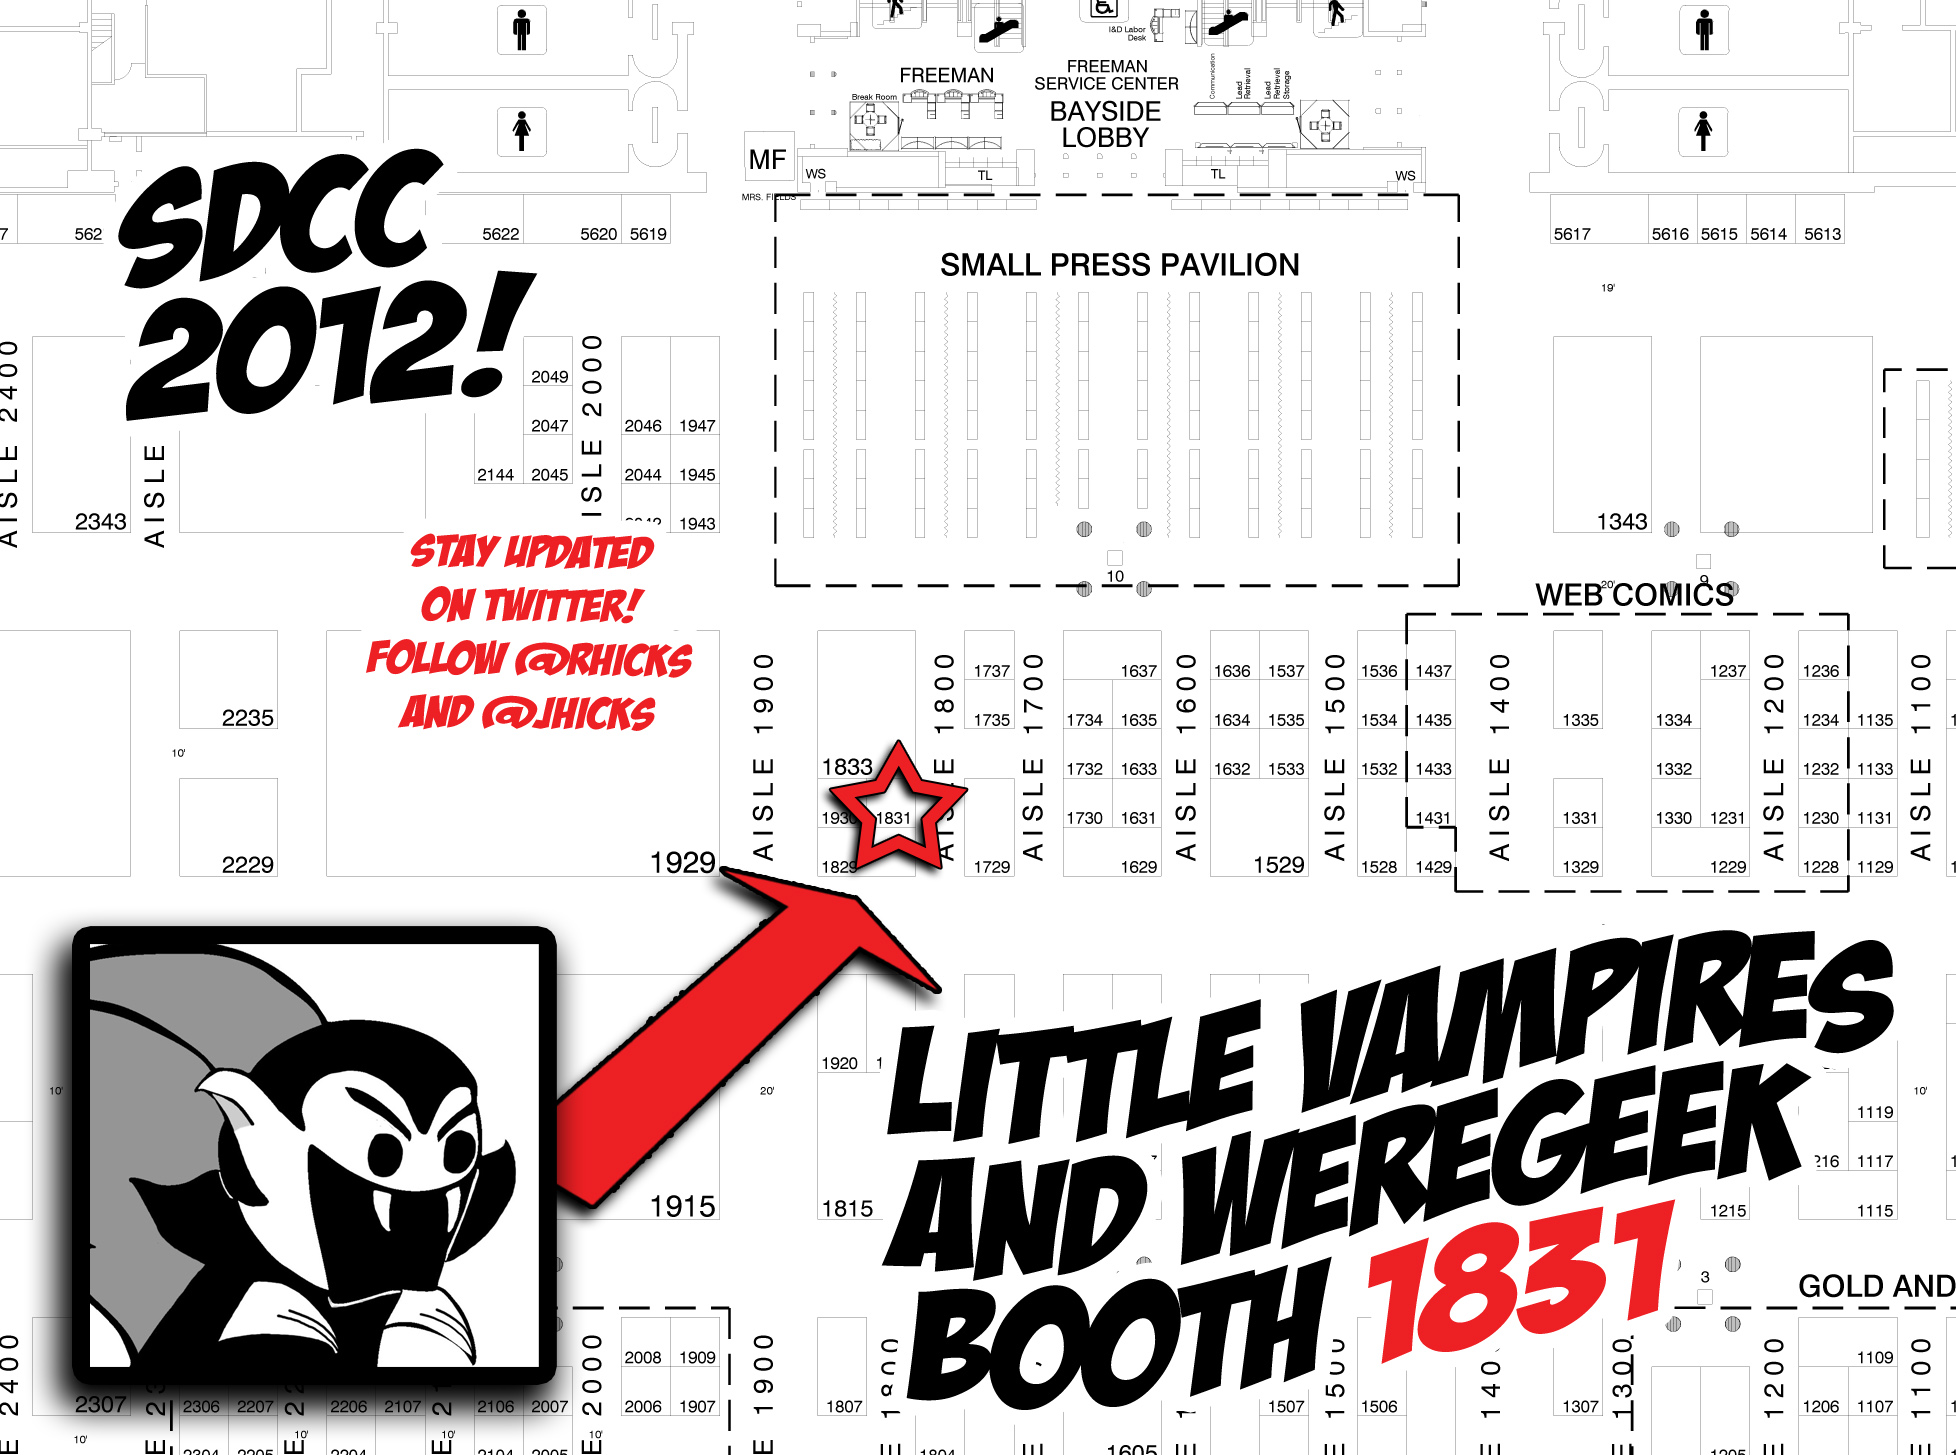 San Diego Comic-Con 2012 floor map with Little Vampires booth highlighted